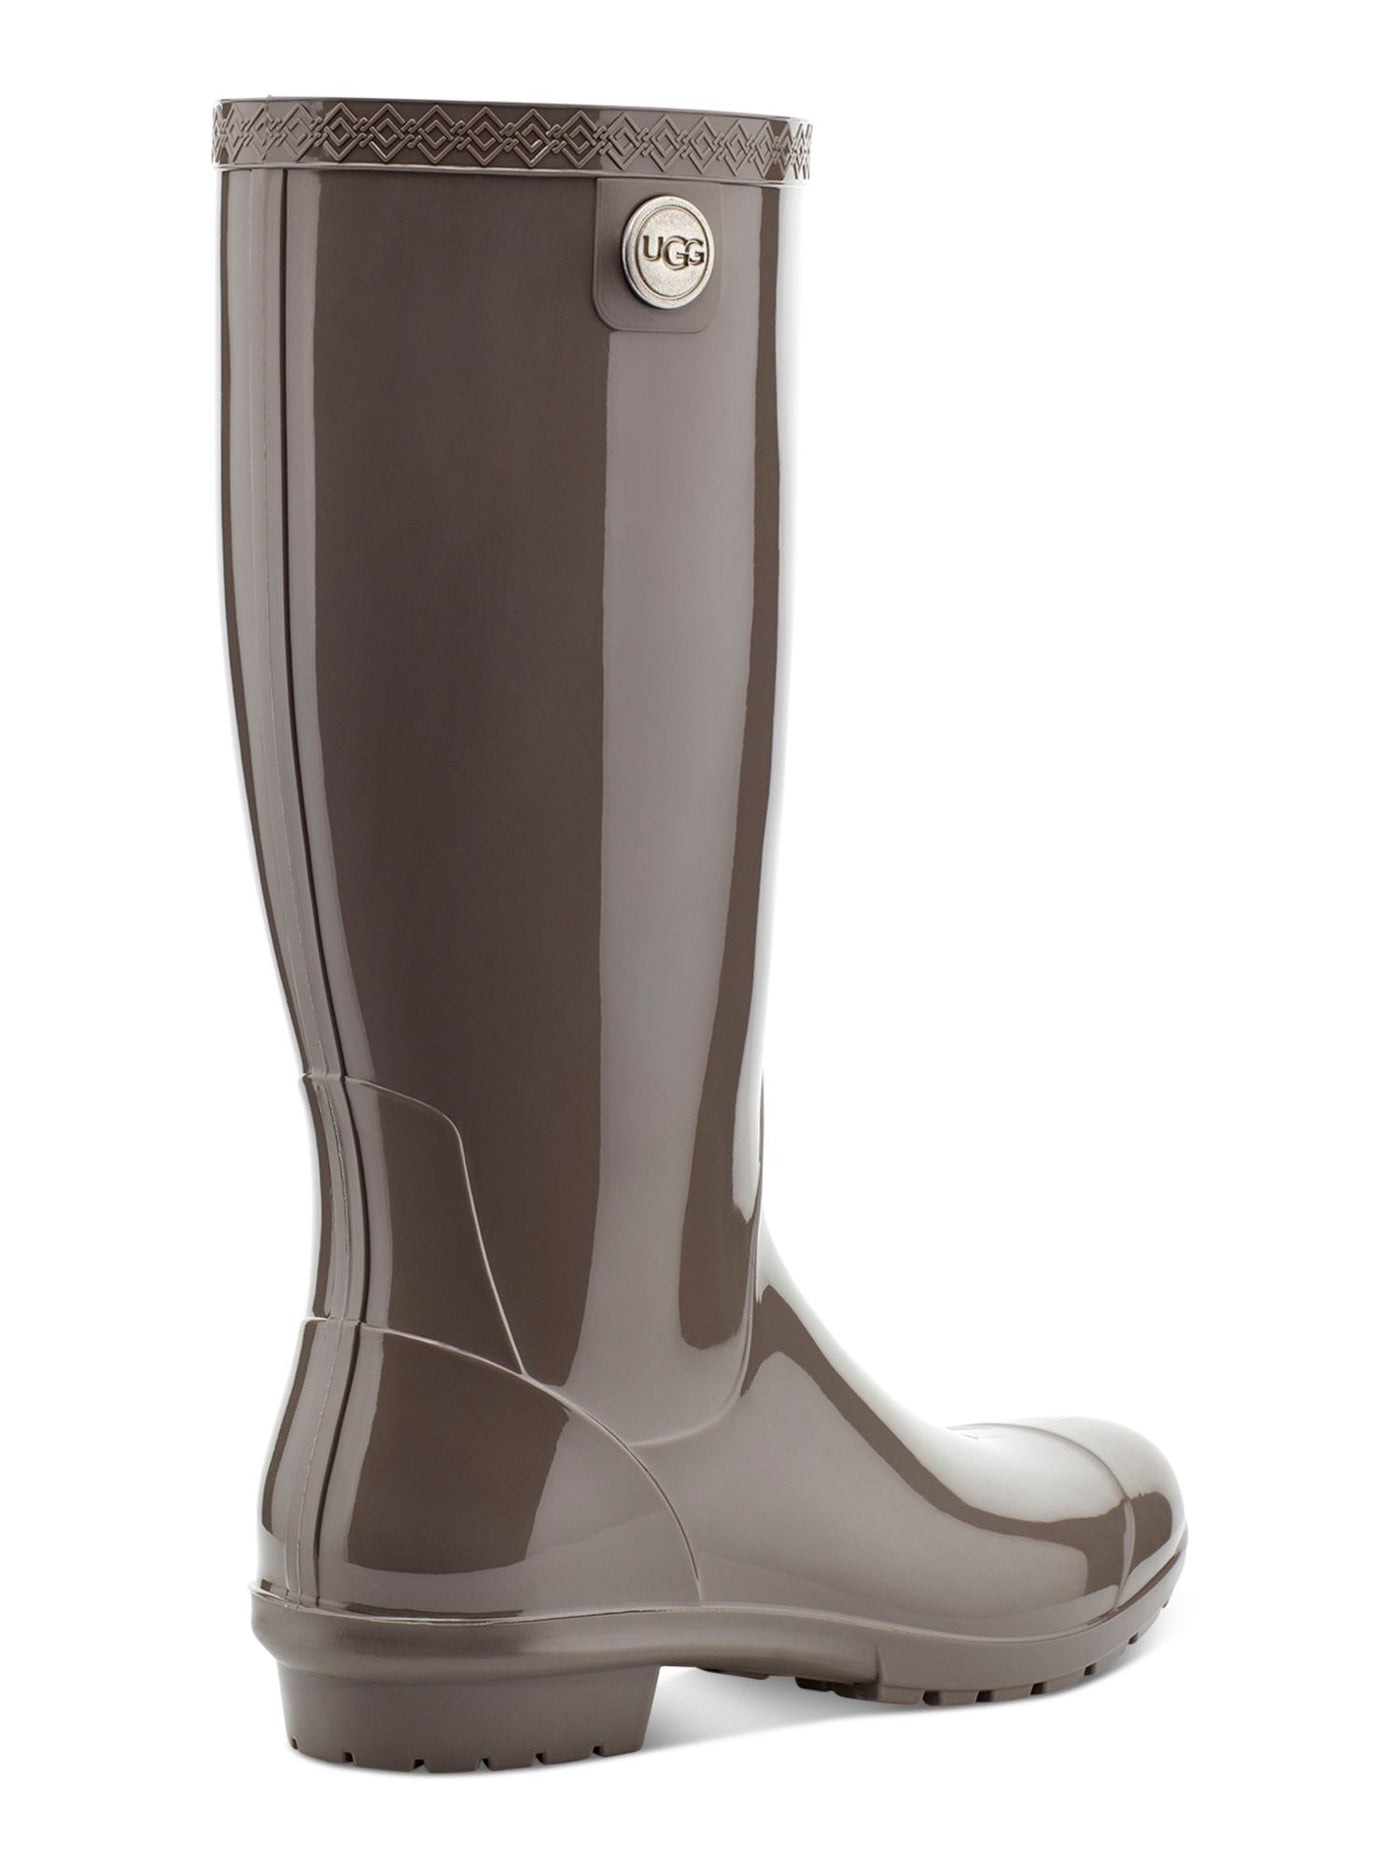 UGG Womens Gray Waterproof Removable Insole Sienna Round Toe Rain Boots 7